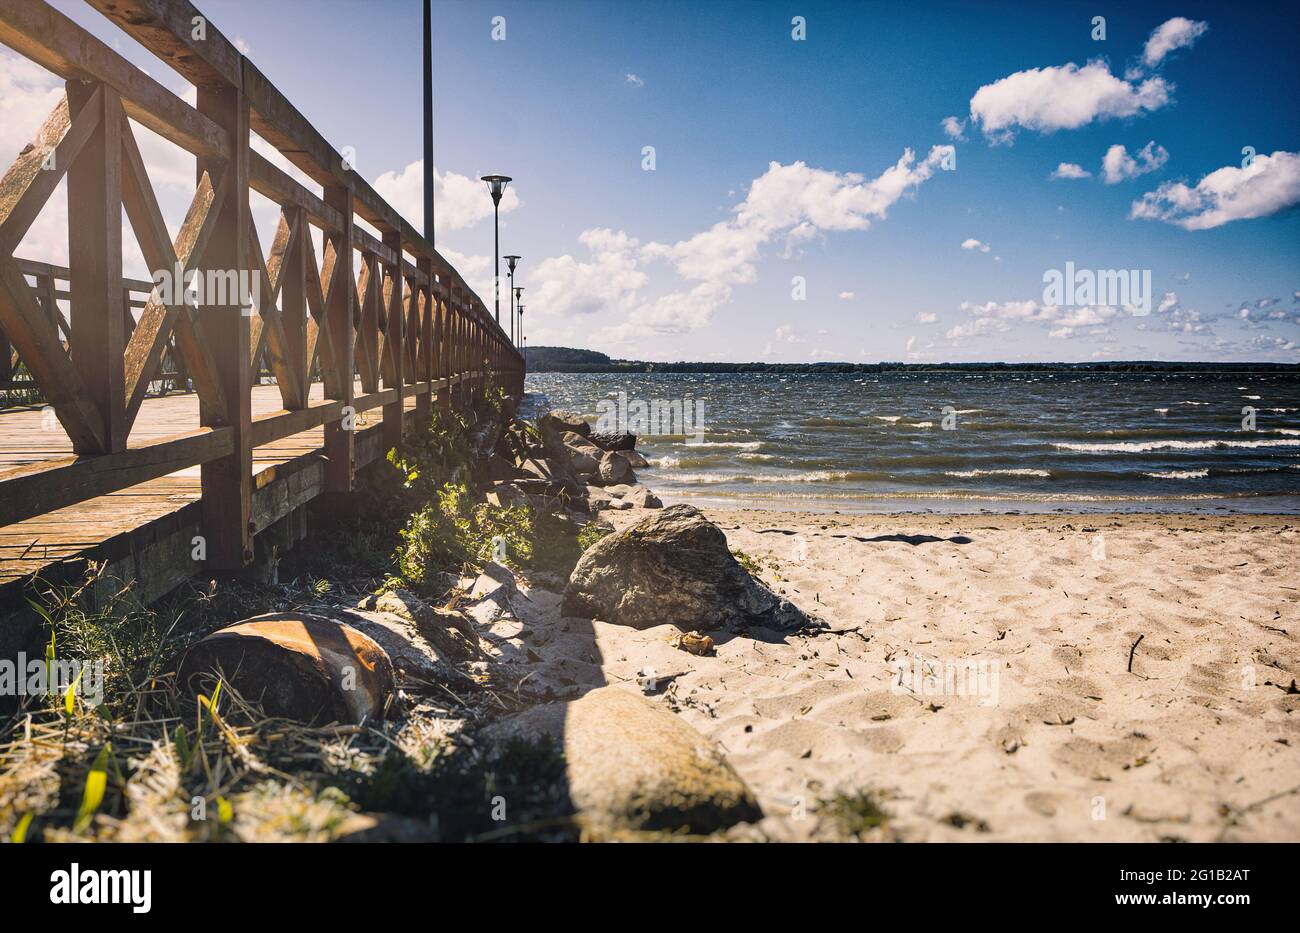 Jetty on a beautiful sandy beach in Poland. Jetty on the beach of Lake Zarnowitz in Poland on a warm summer day overlooking the open sea. Stock Photo